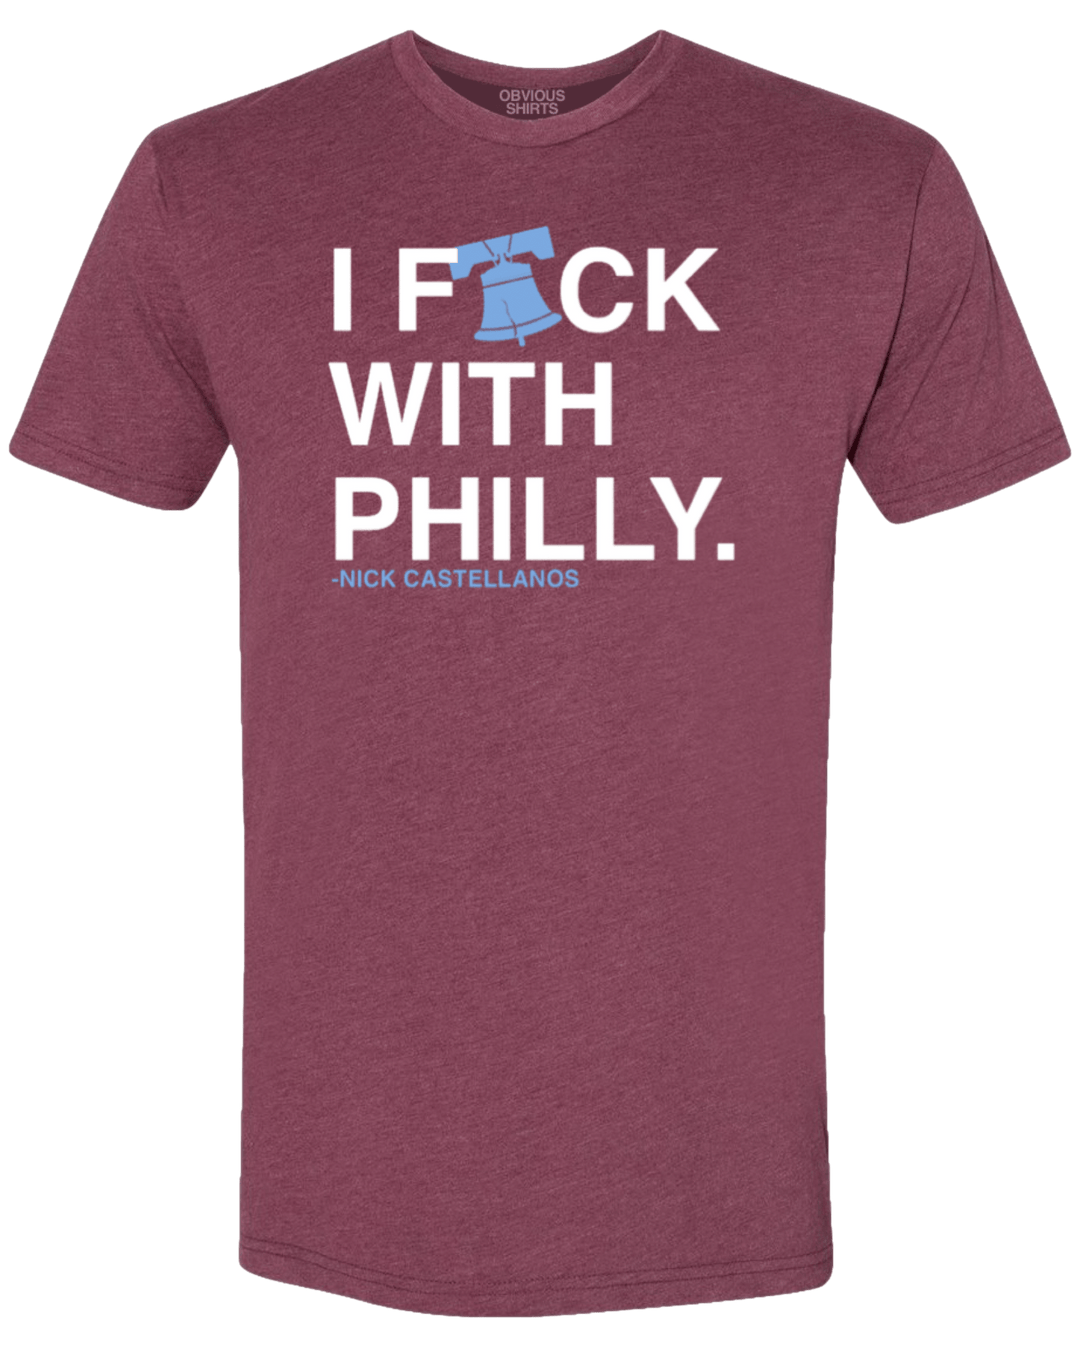 I F-CK WITH PHILLY. - OBVIOUS SHIRTS